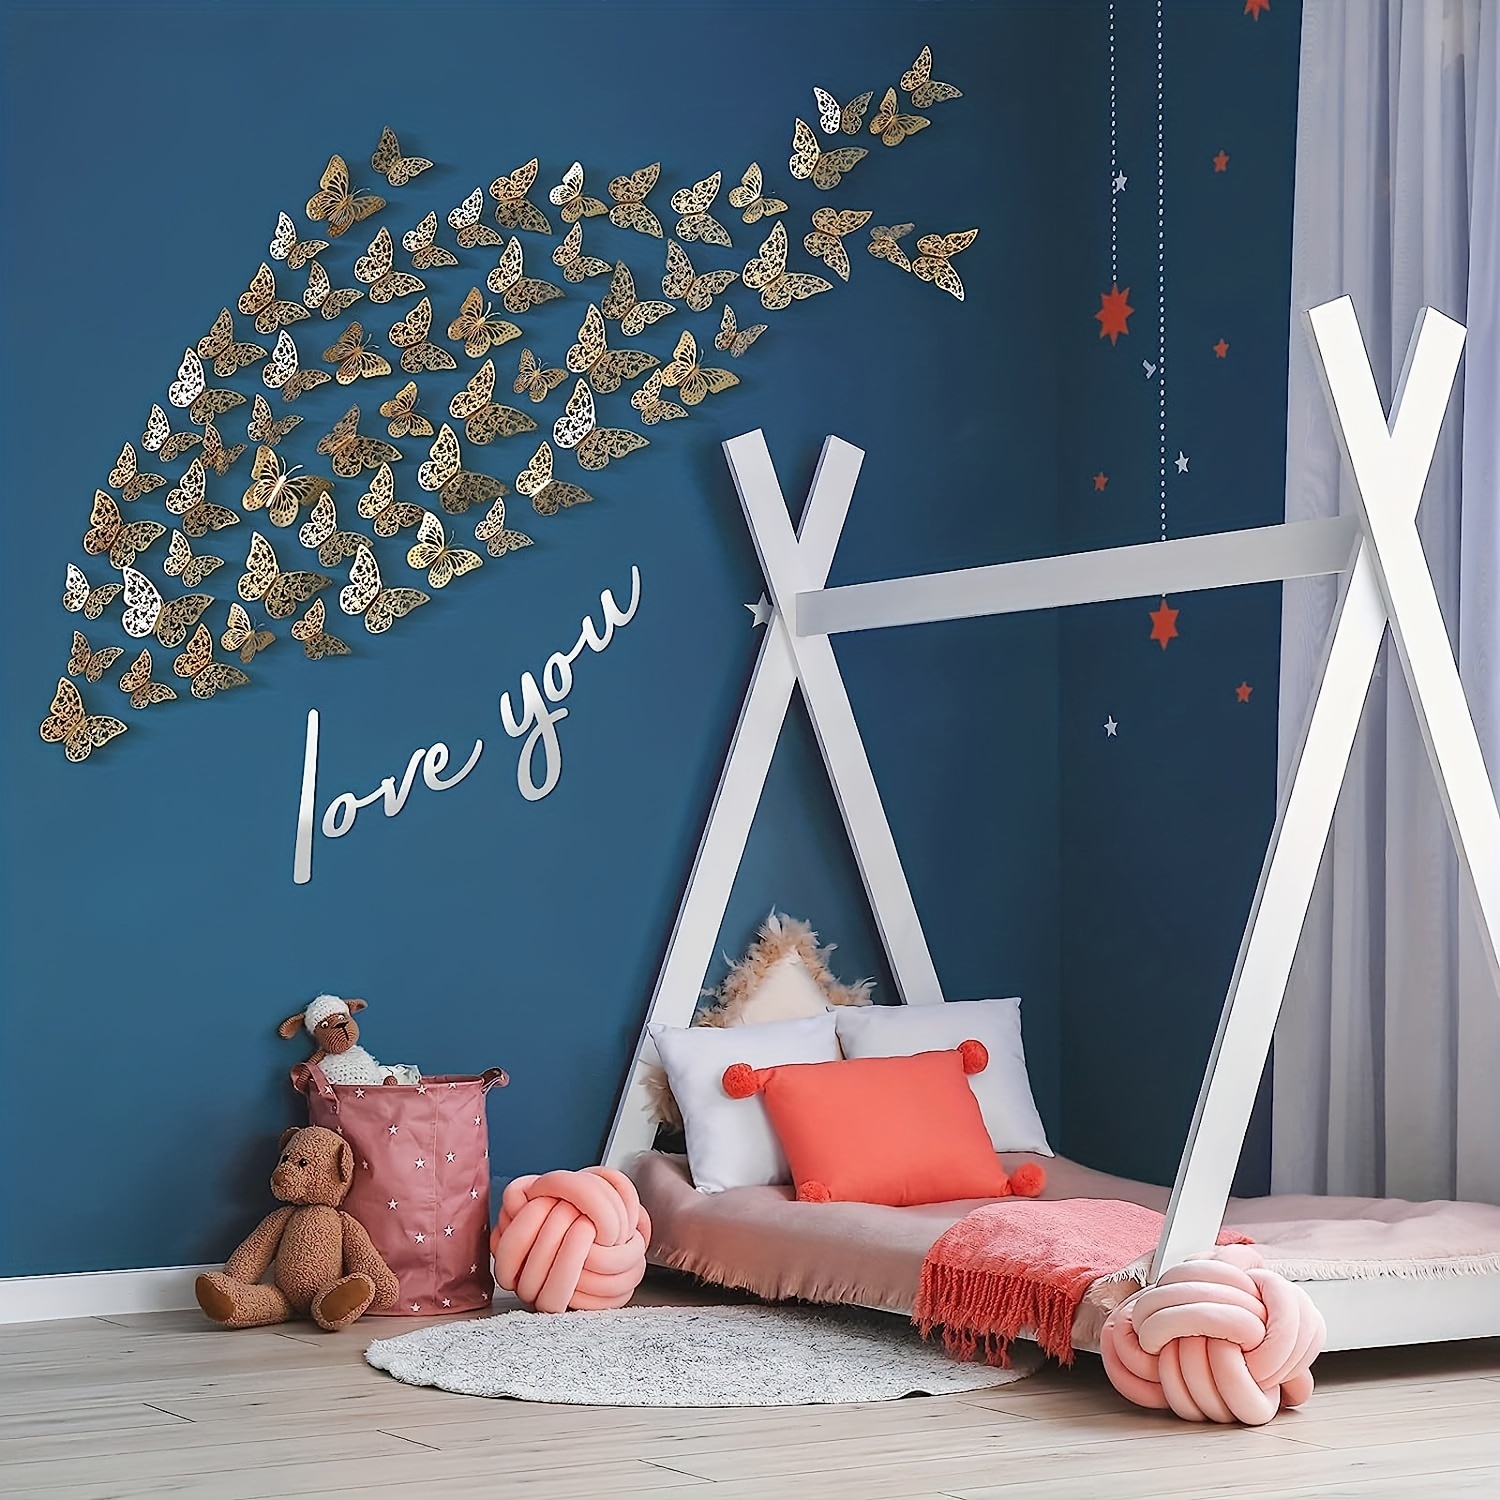 

48pcs/set Artistic Wall Decal, 3d Gold Butterfly Hollow Out Mural, Self-adhesive Wall Art Sticker For Bedroom, Entryway, Living Room, Office, Porch, Background Wall Decor, Home Decoration